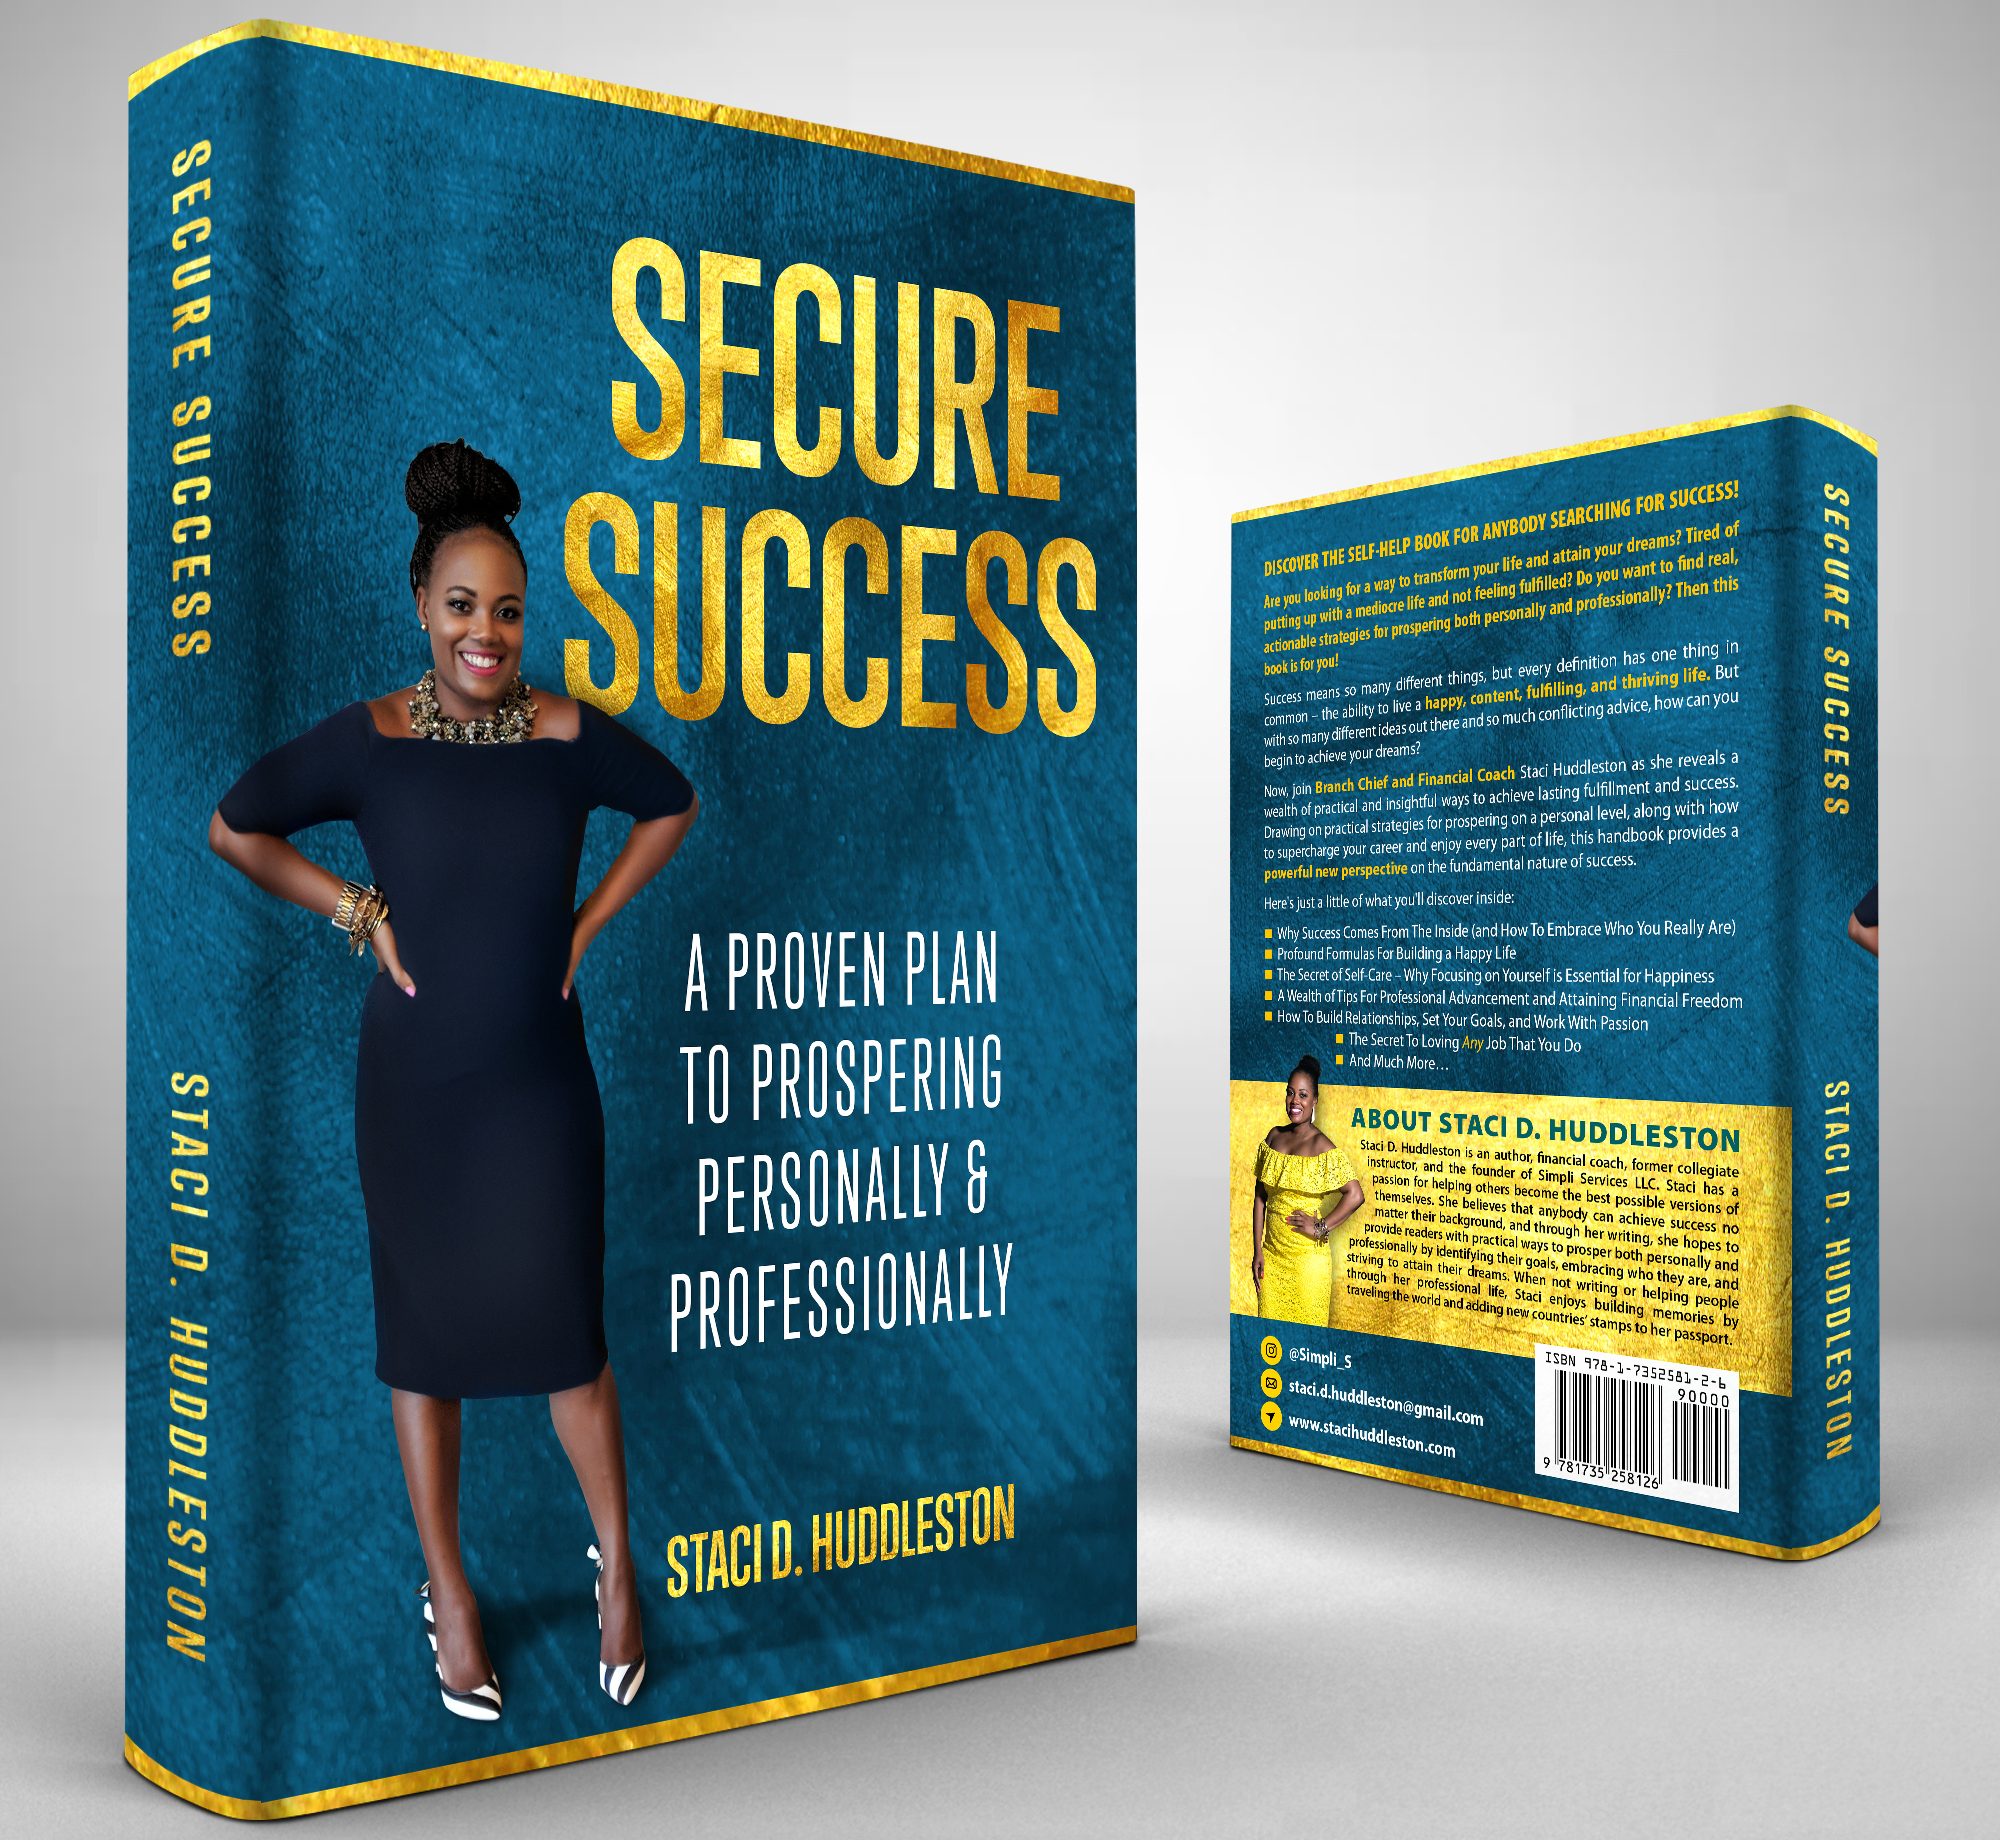 Secure Success Book Cover Revealed…